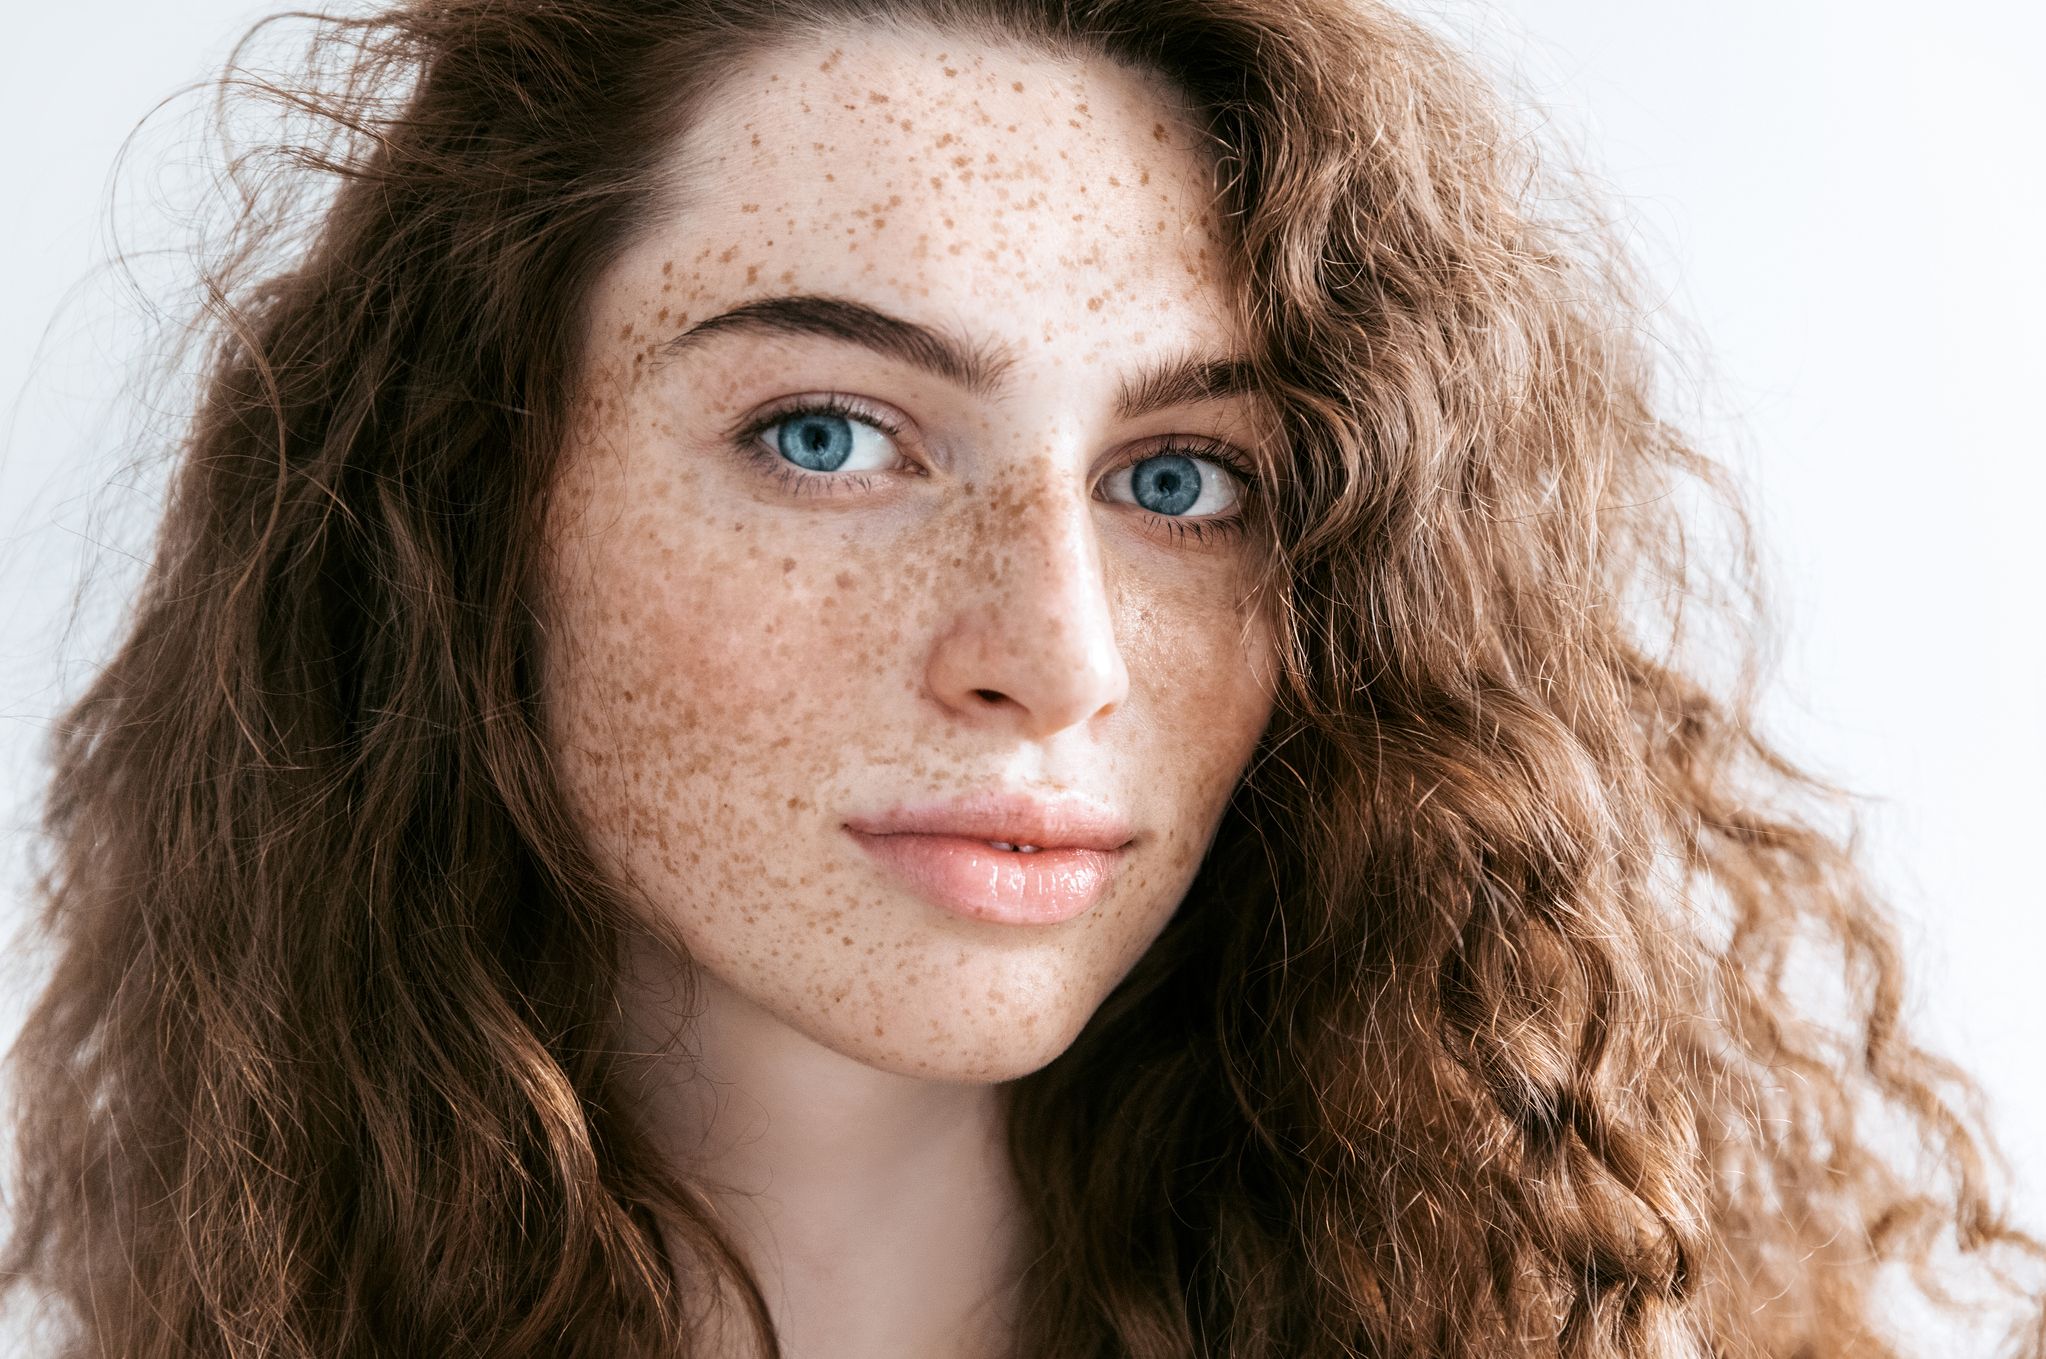 Beautiful Freckles young woman close up portrait. Attractive model with beautiful blue eyes and ginger curly hair